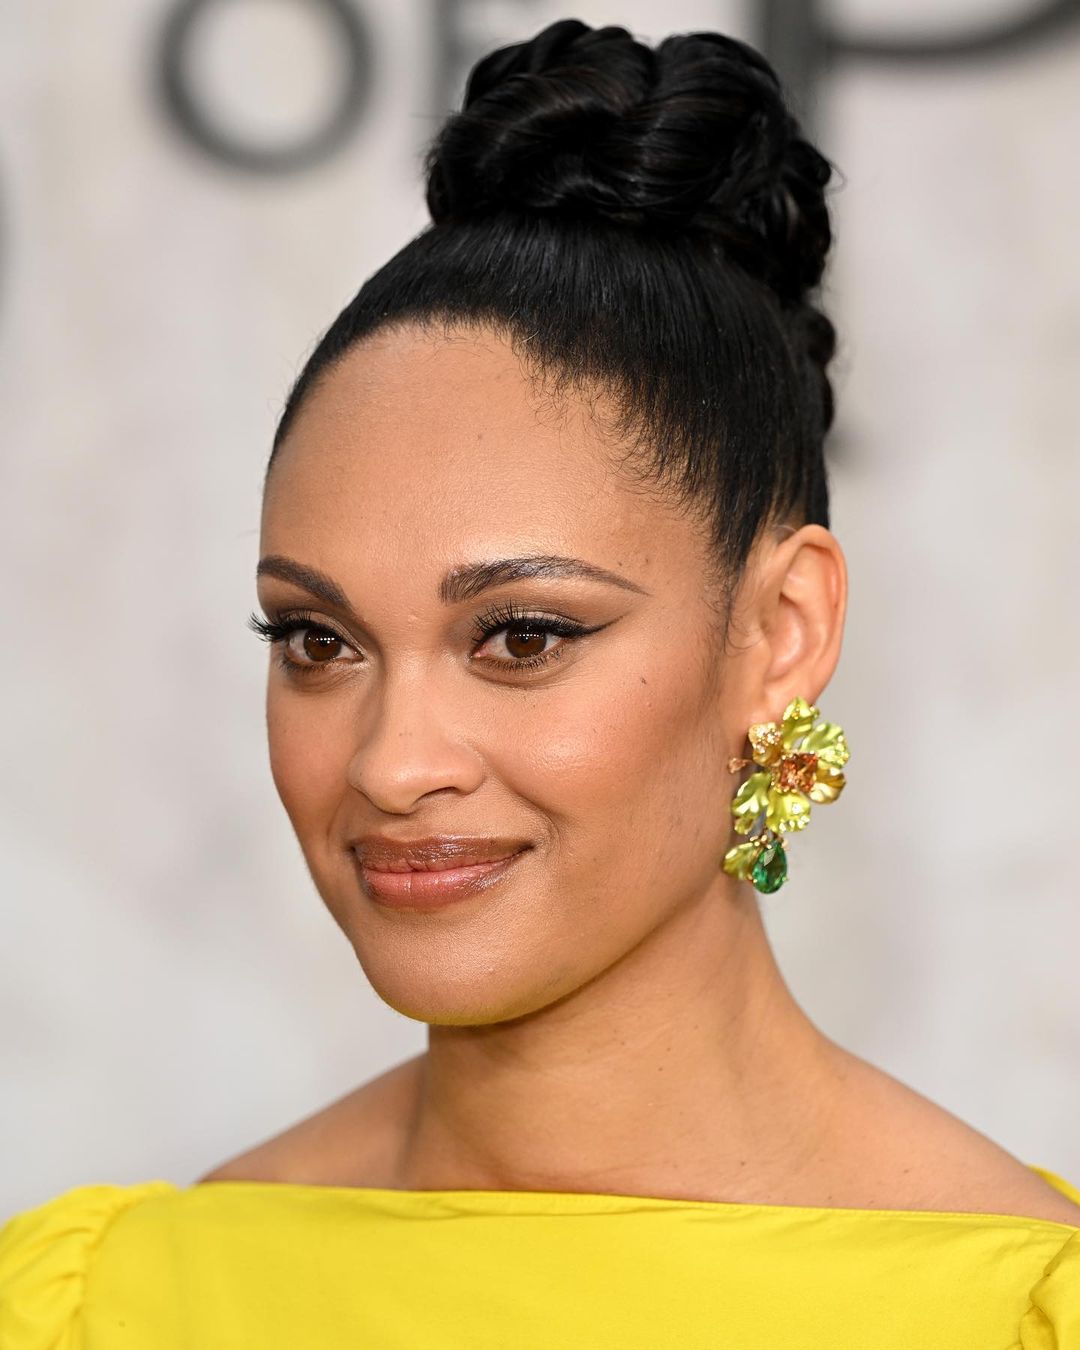 What is Cynthia Addai-Robinson’s physical appearance